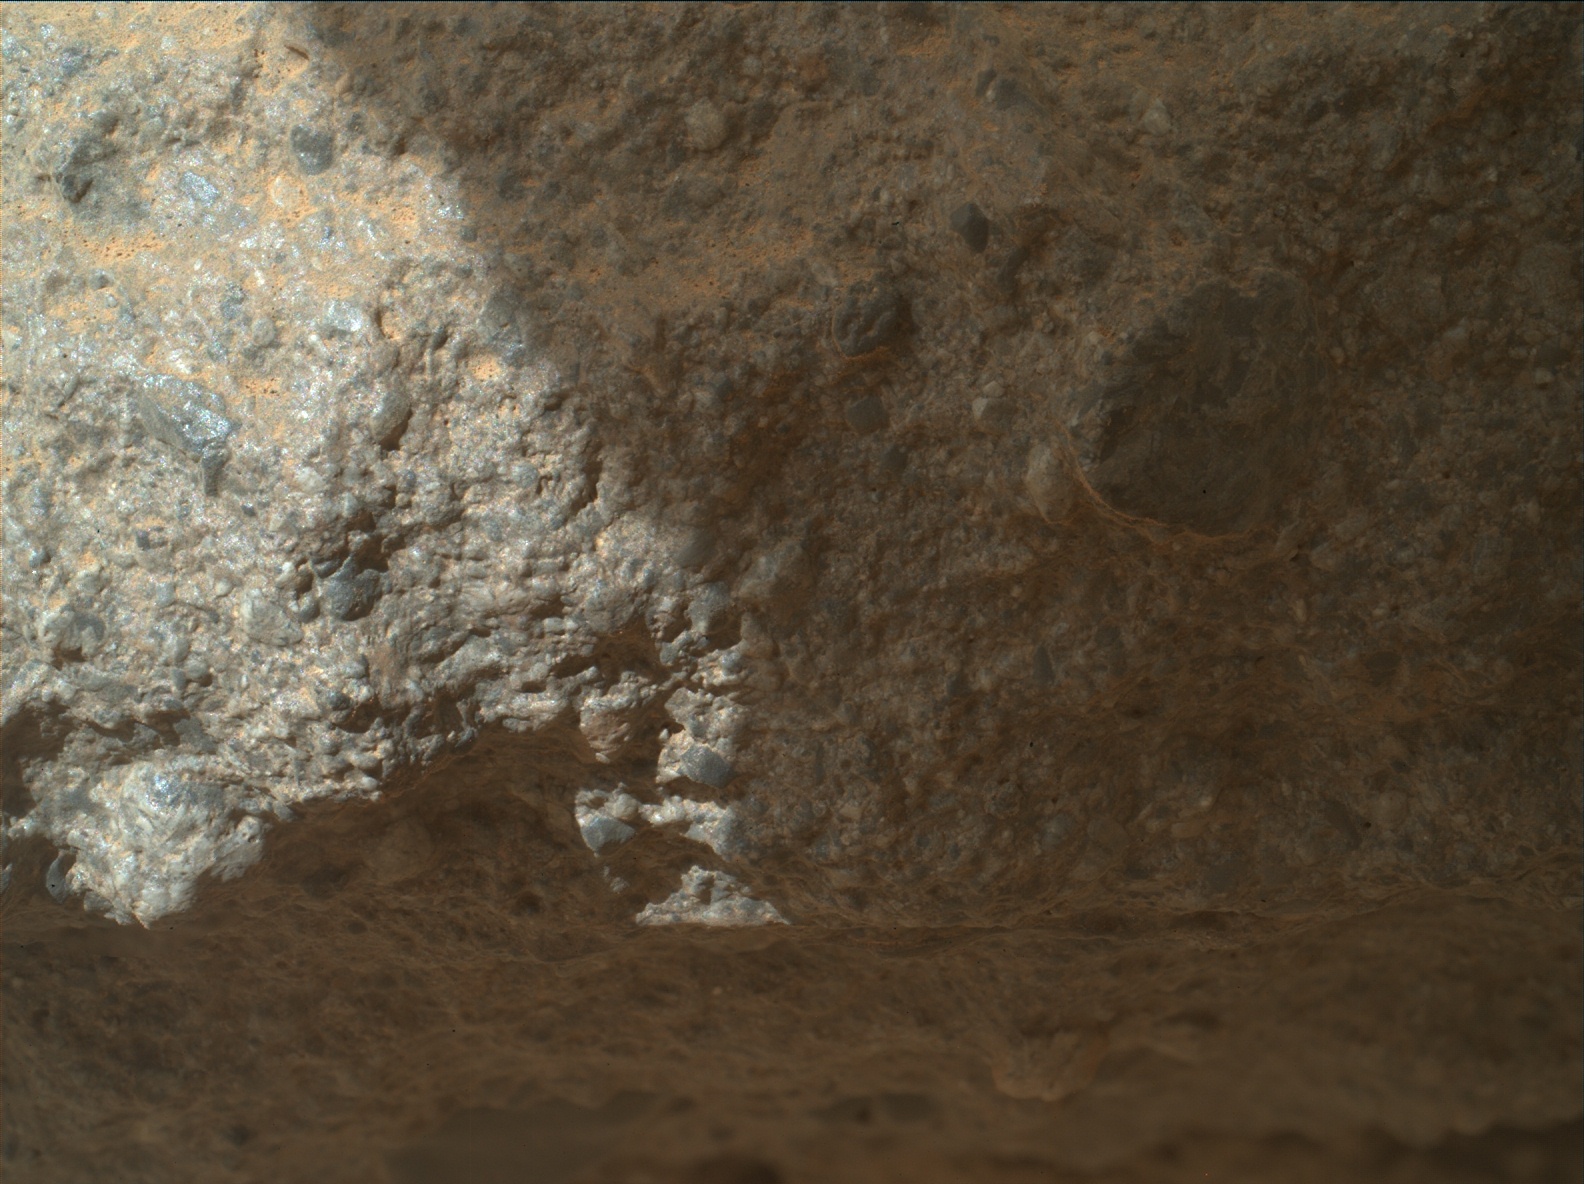 Nasa's Mars rover Curiosity acquired this image using its Mars Hand Lens Imager (MAHLI) on Sol 396